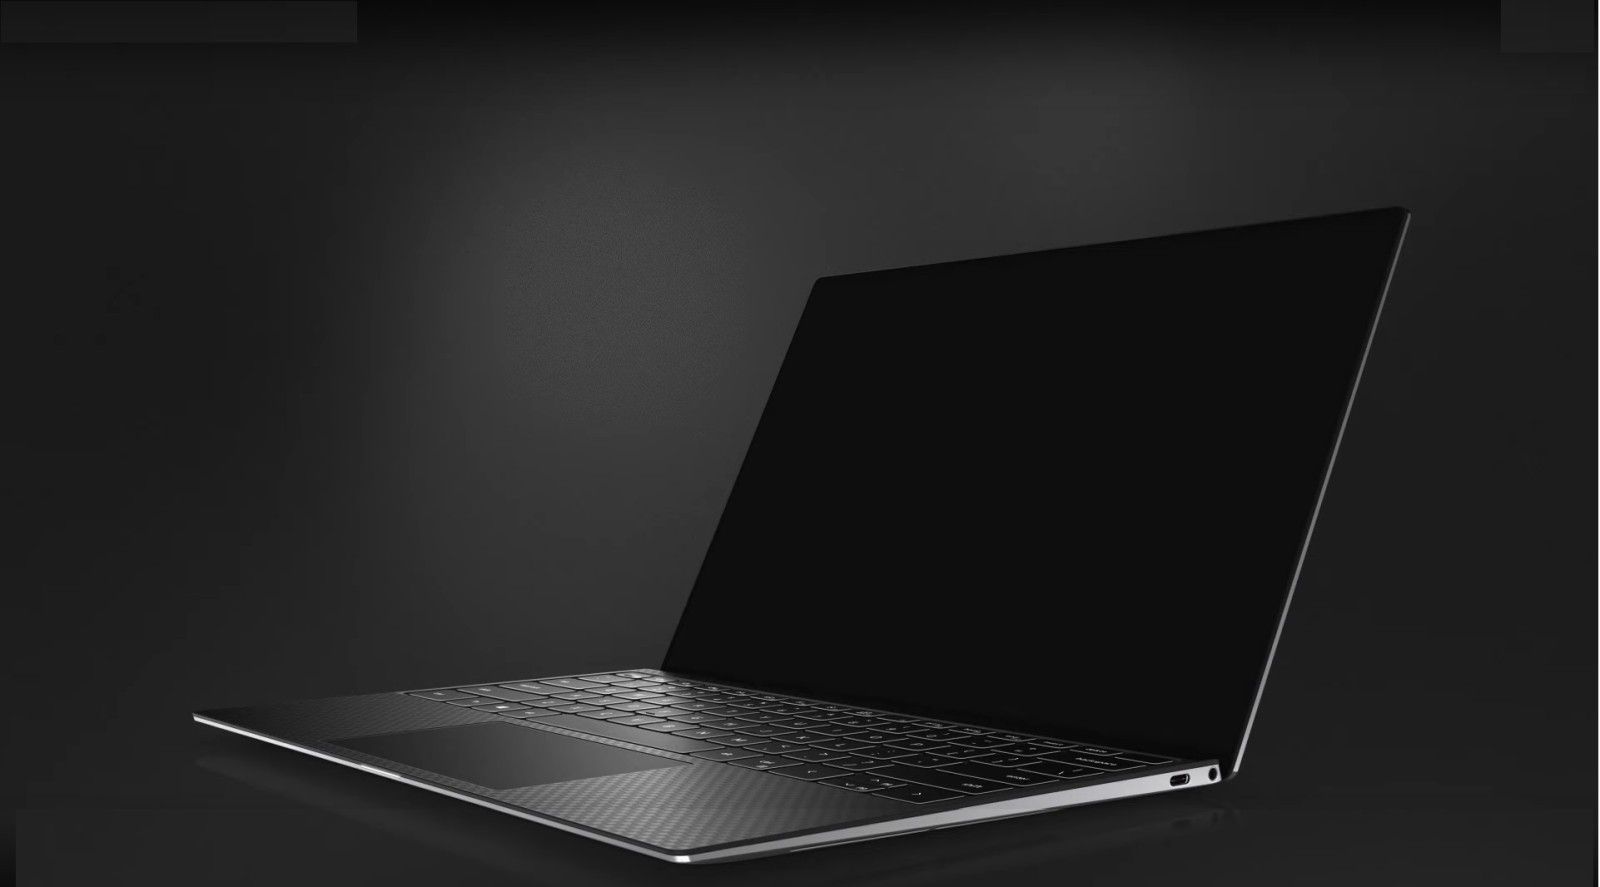 Dell XPS 13 Featured Image